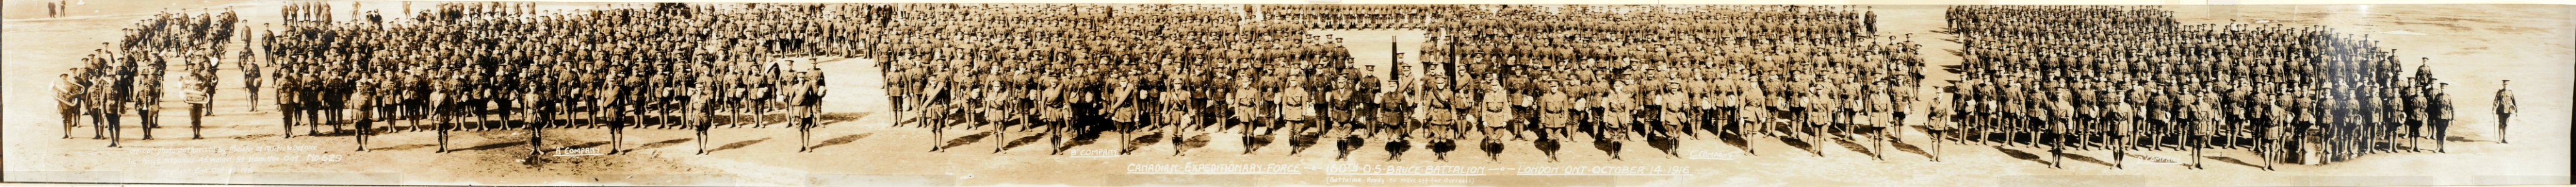 Canadian Expeditionary Force, 160th O.S. Bruce Battalion, London, Ontario, October 14, 1916. (Battalion ready to move off for overseas.) Companies 'A', 'B', 'C', 'D'. No. 629 (HS85-10-32567) photo